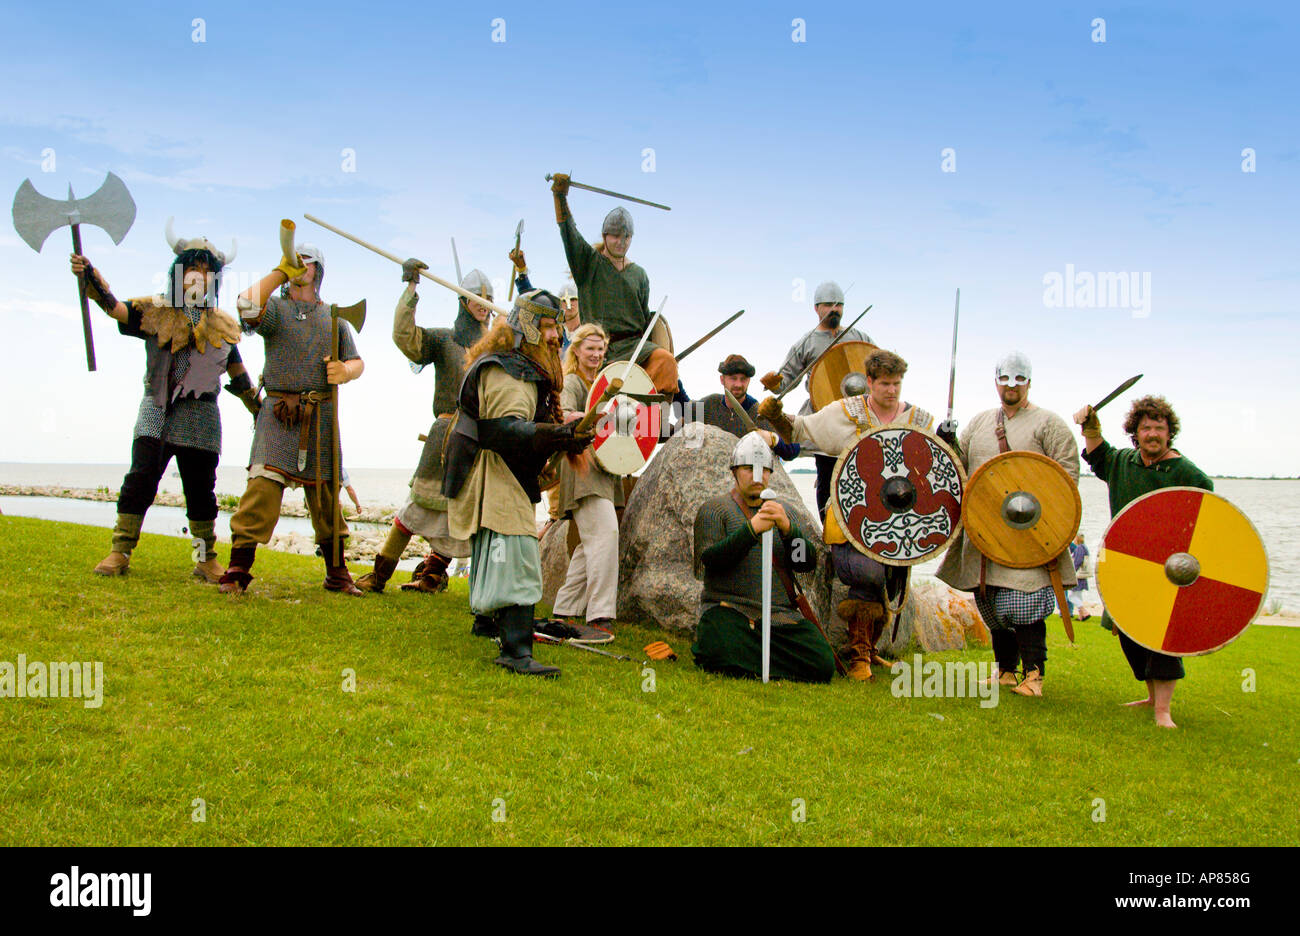 A group picture of a reinactment of an Icelandic Viking battle in traditional dress in Gimli, Manitoba, Canada. Stock Photo